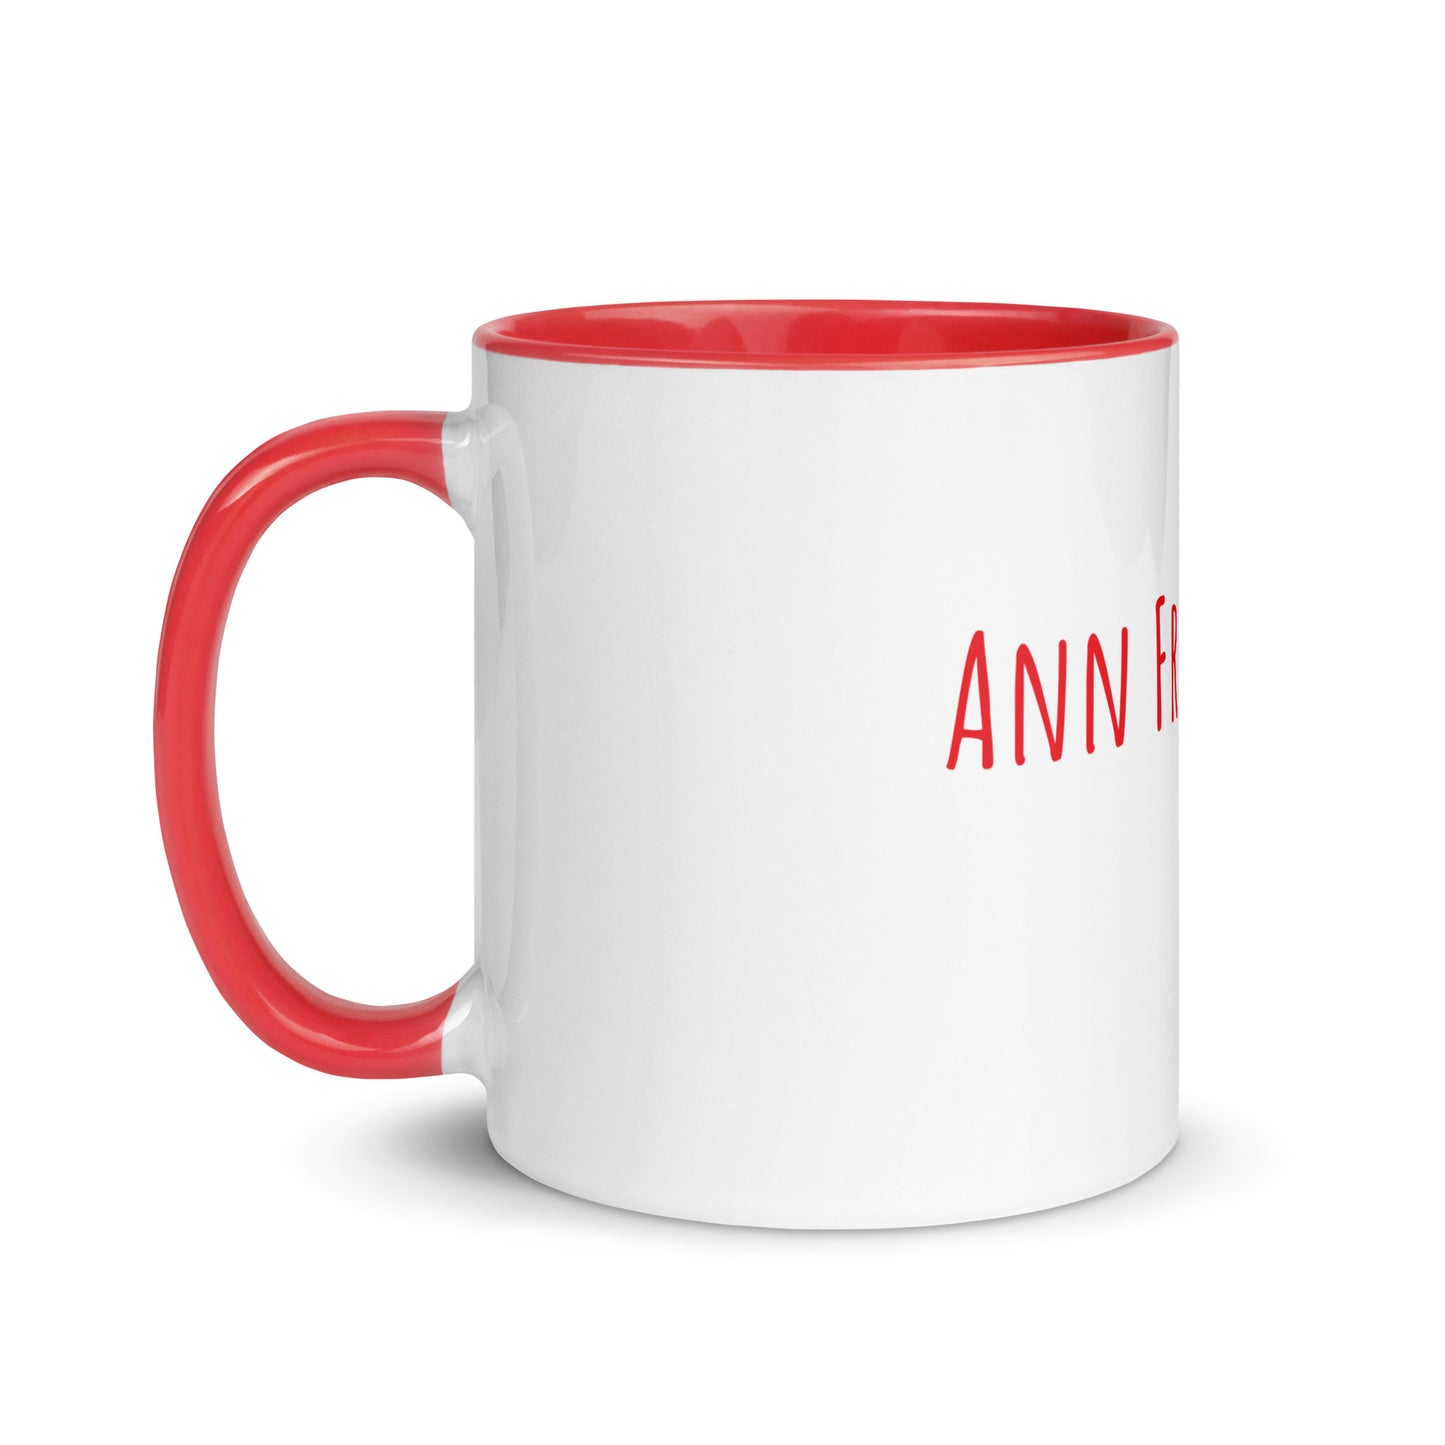 Ann From Japan Mug with Color Inside